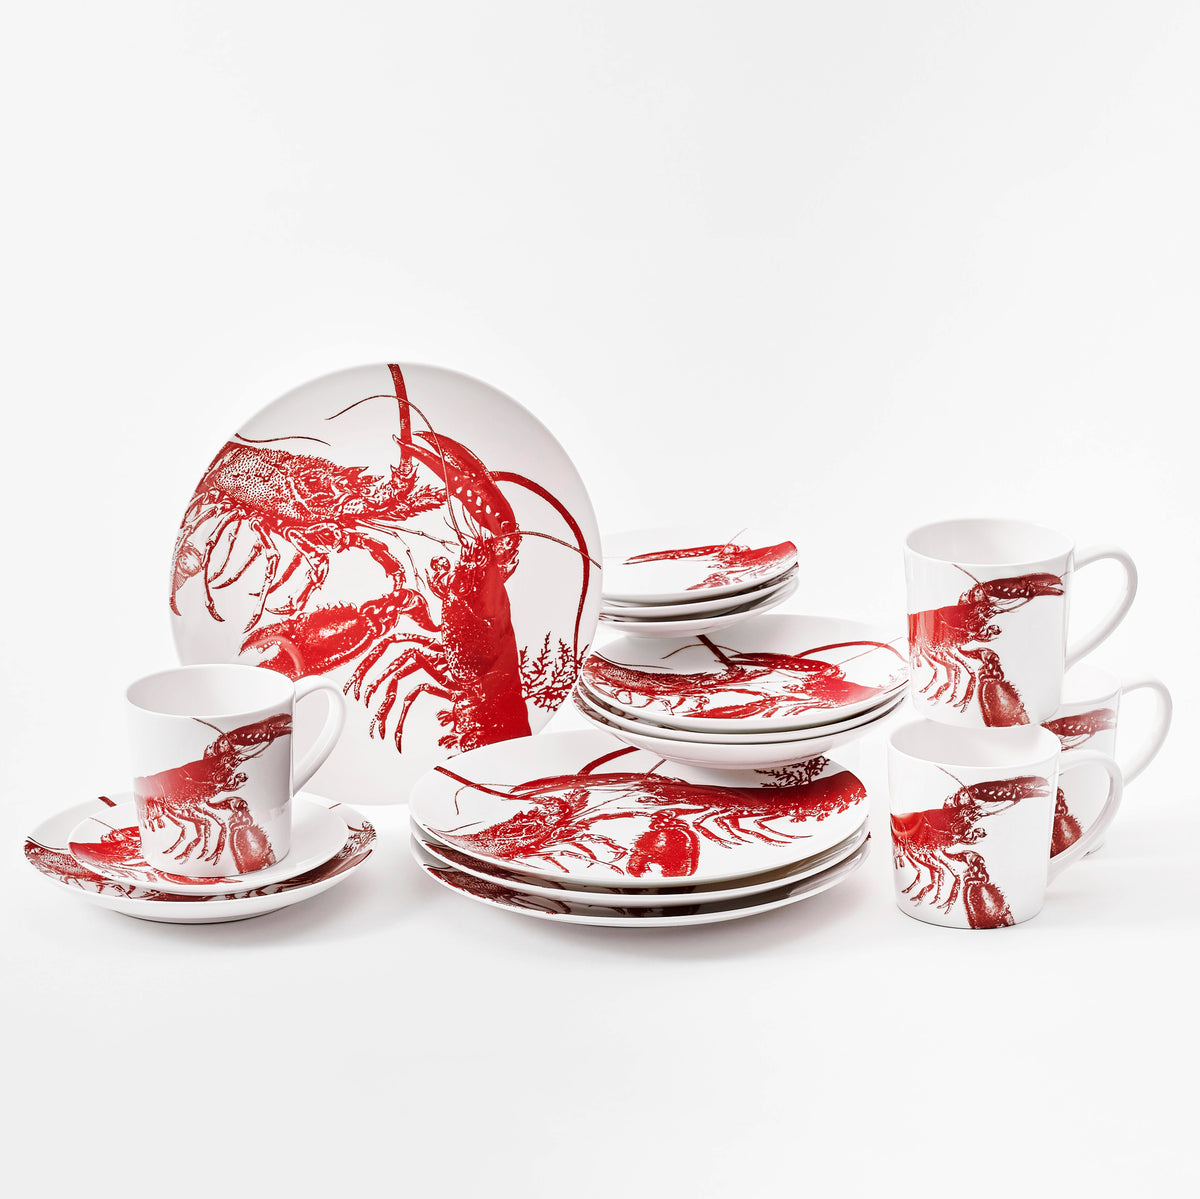 16 piece dinnerware set features large red lobsters on this complete table for 4 from Caskata